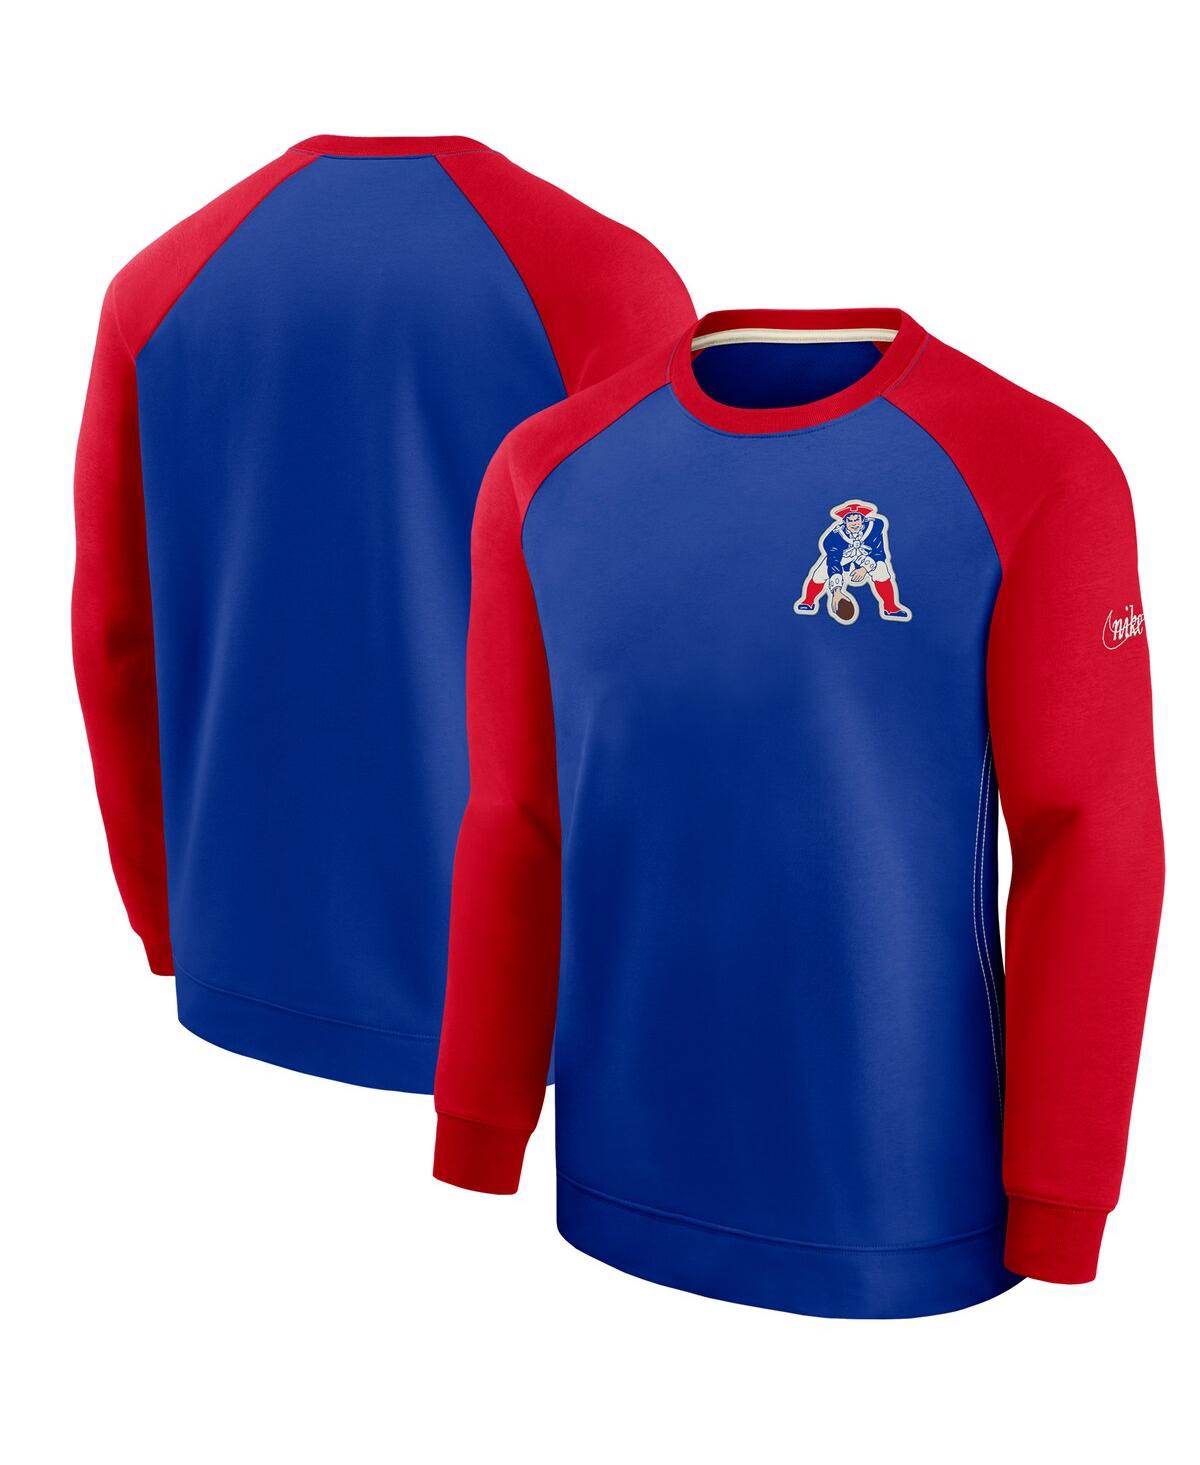 Men's Nike Royal and Red New England Patriots Historic Raglan Crew Performance Sweater - Royal, Red